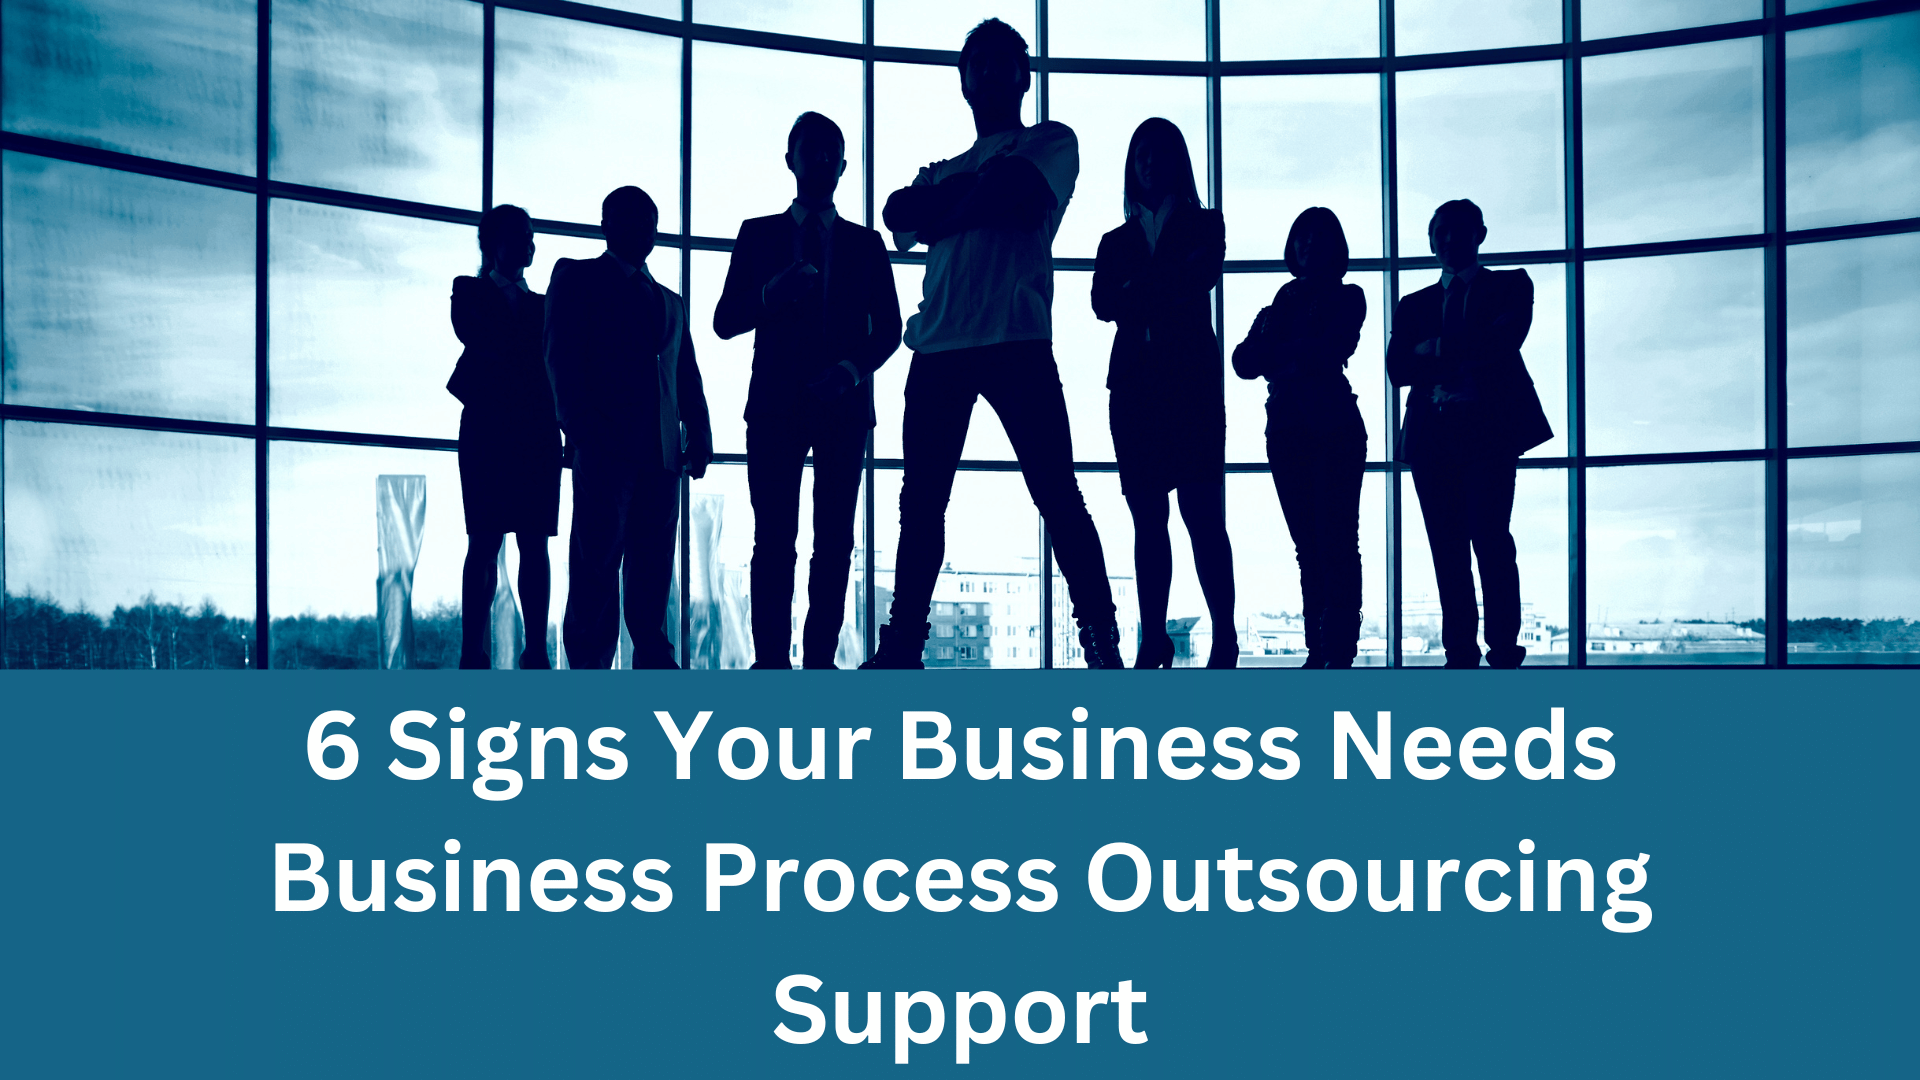 Image of 6 Signs Your Business Needs Business Process Outsourcing Support